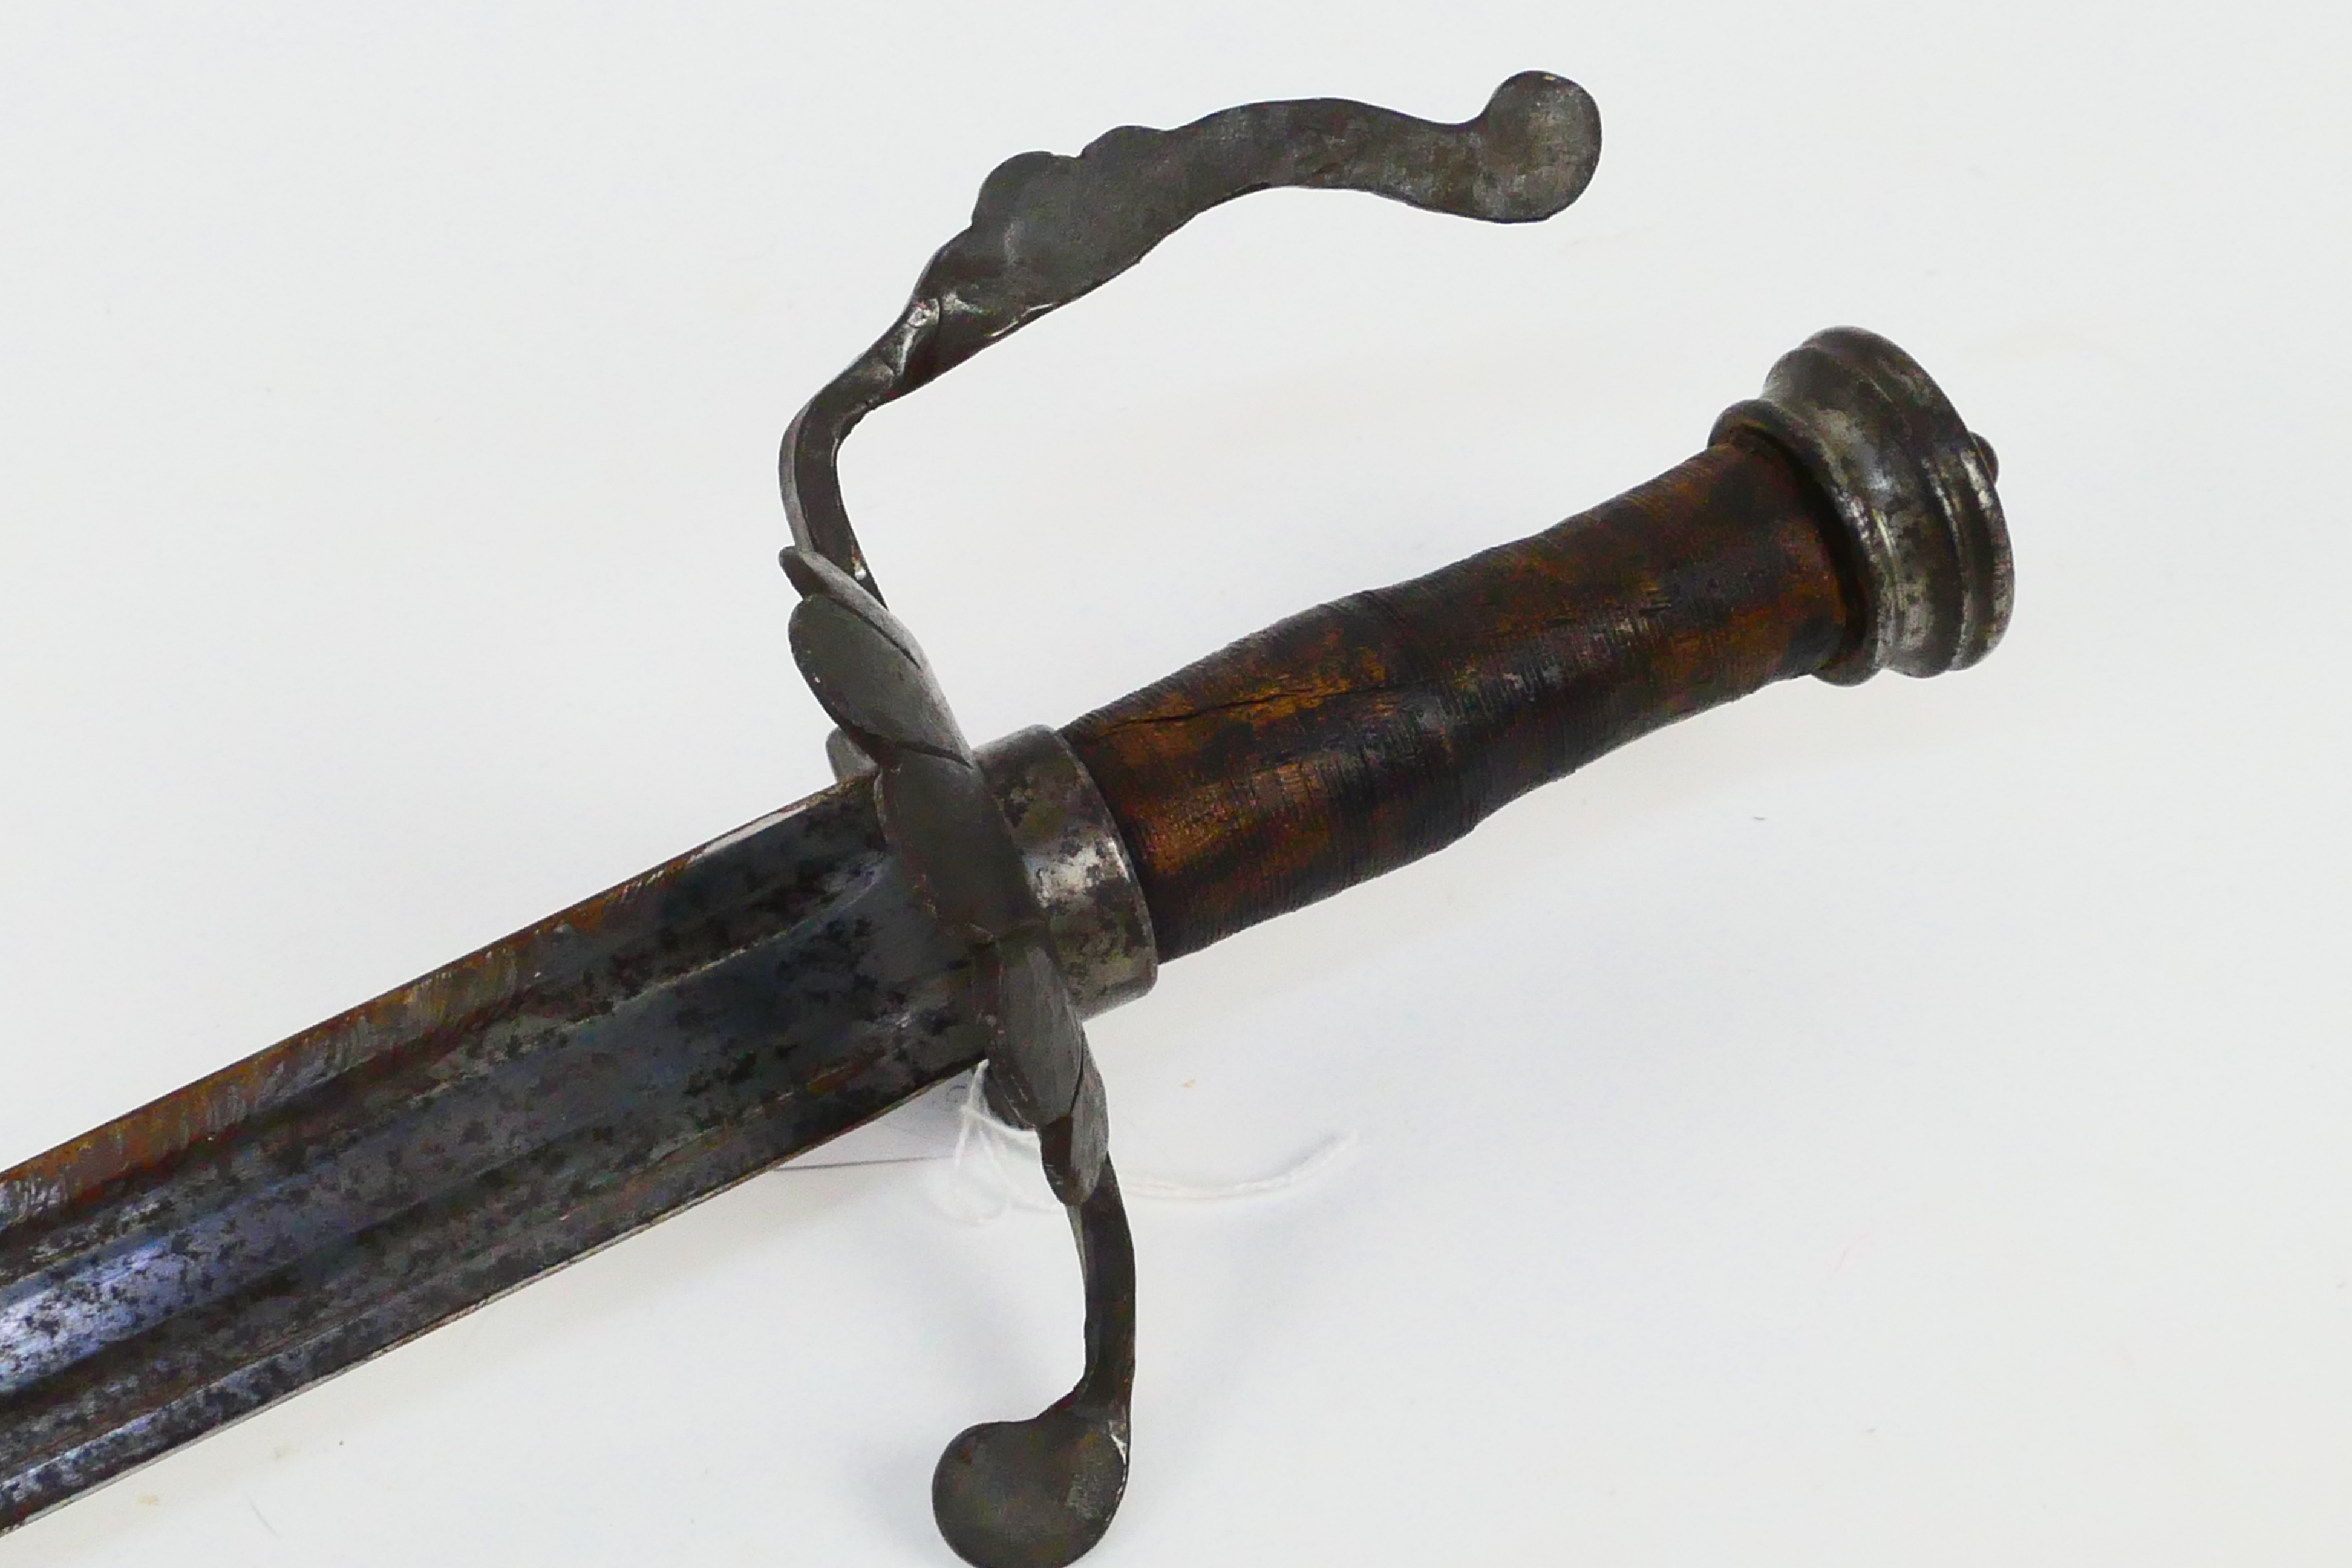 An antique hunting short sword, probably 18th century, iron shell guard, 62 cm (l) blade. - Image 2 of 7